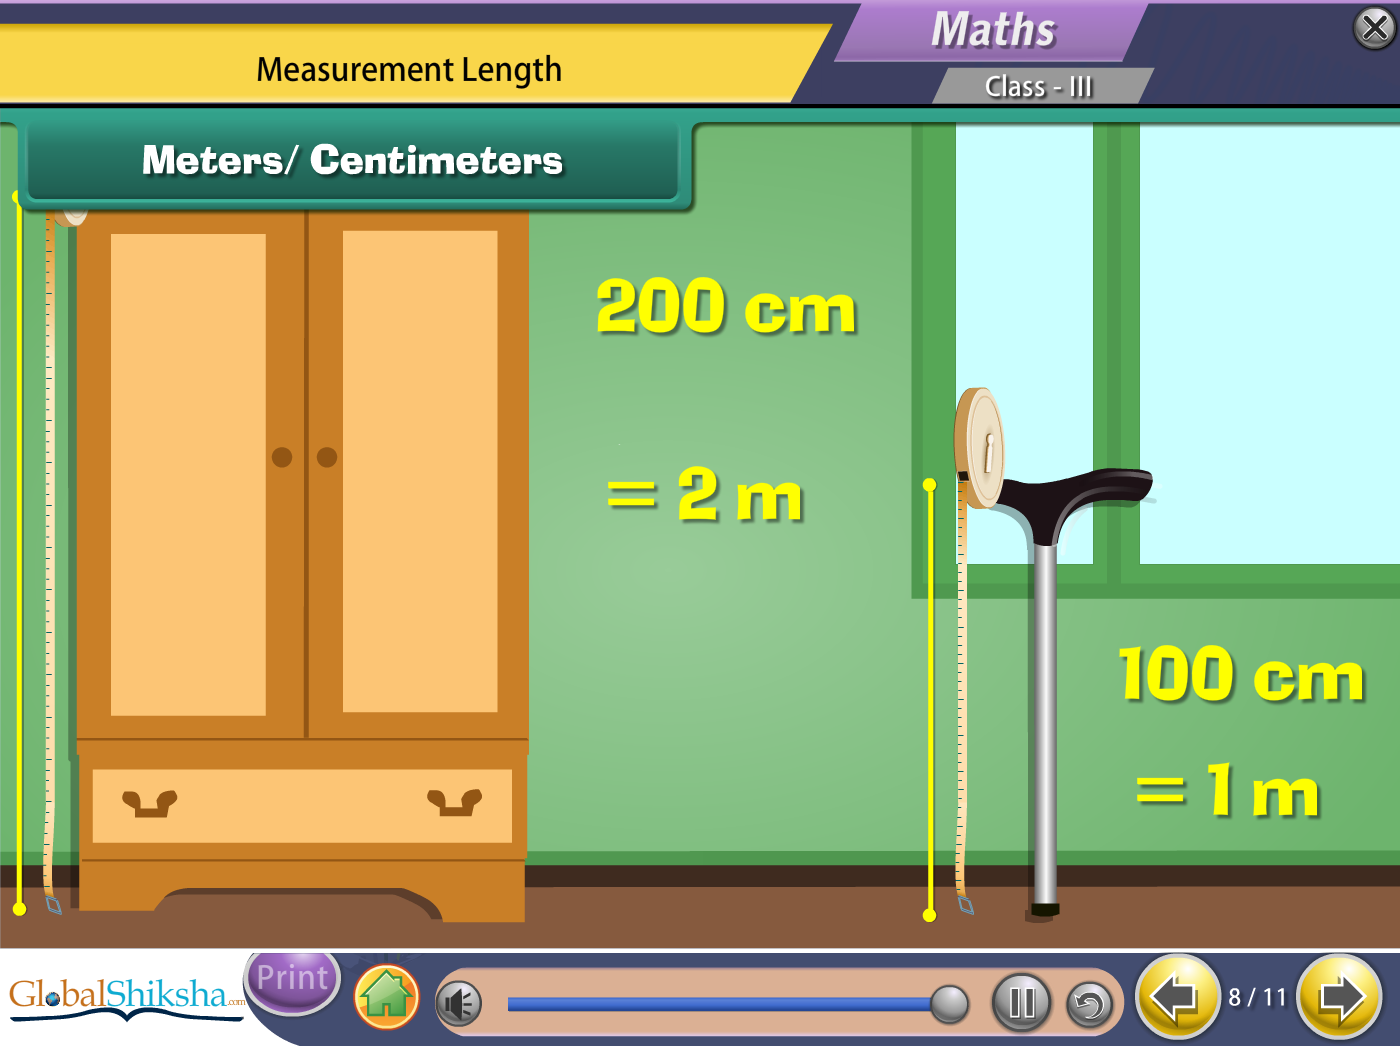 NCERT Class 3 Maths & Science Animated Pendrive in English